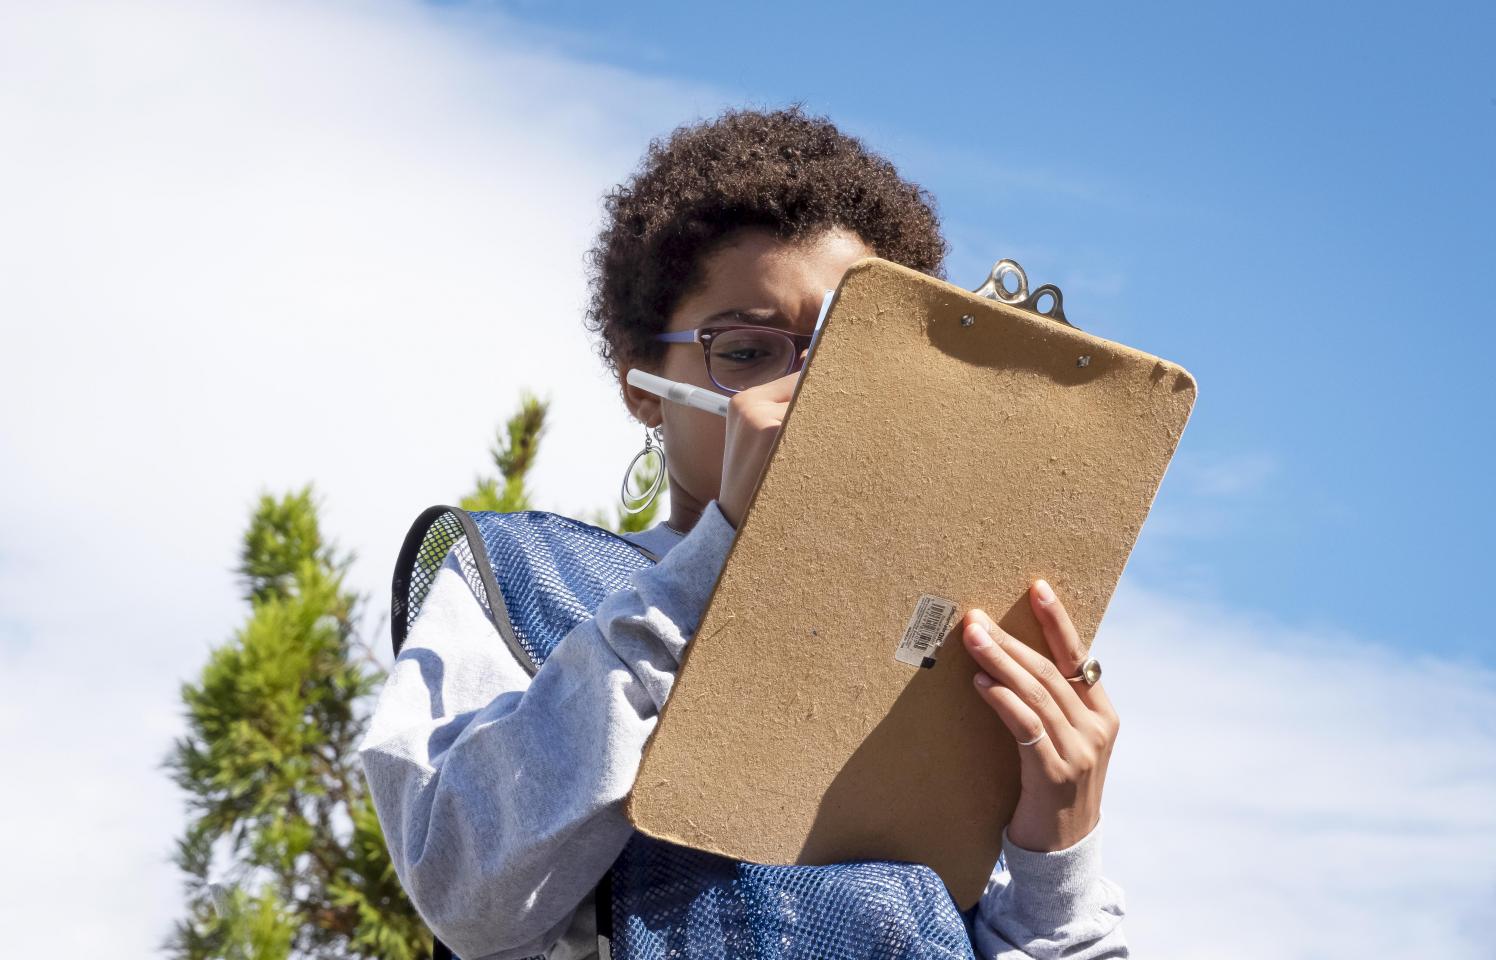 Volunteer writing on a clipboard on a sunny day.